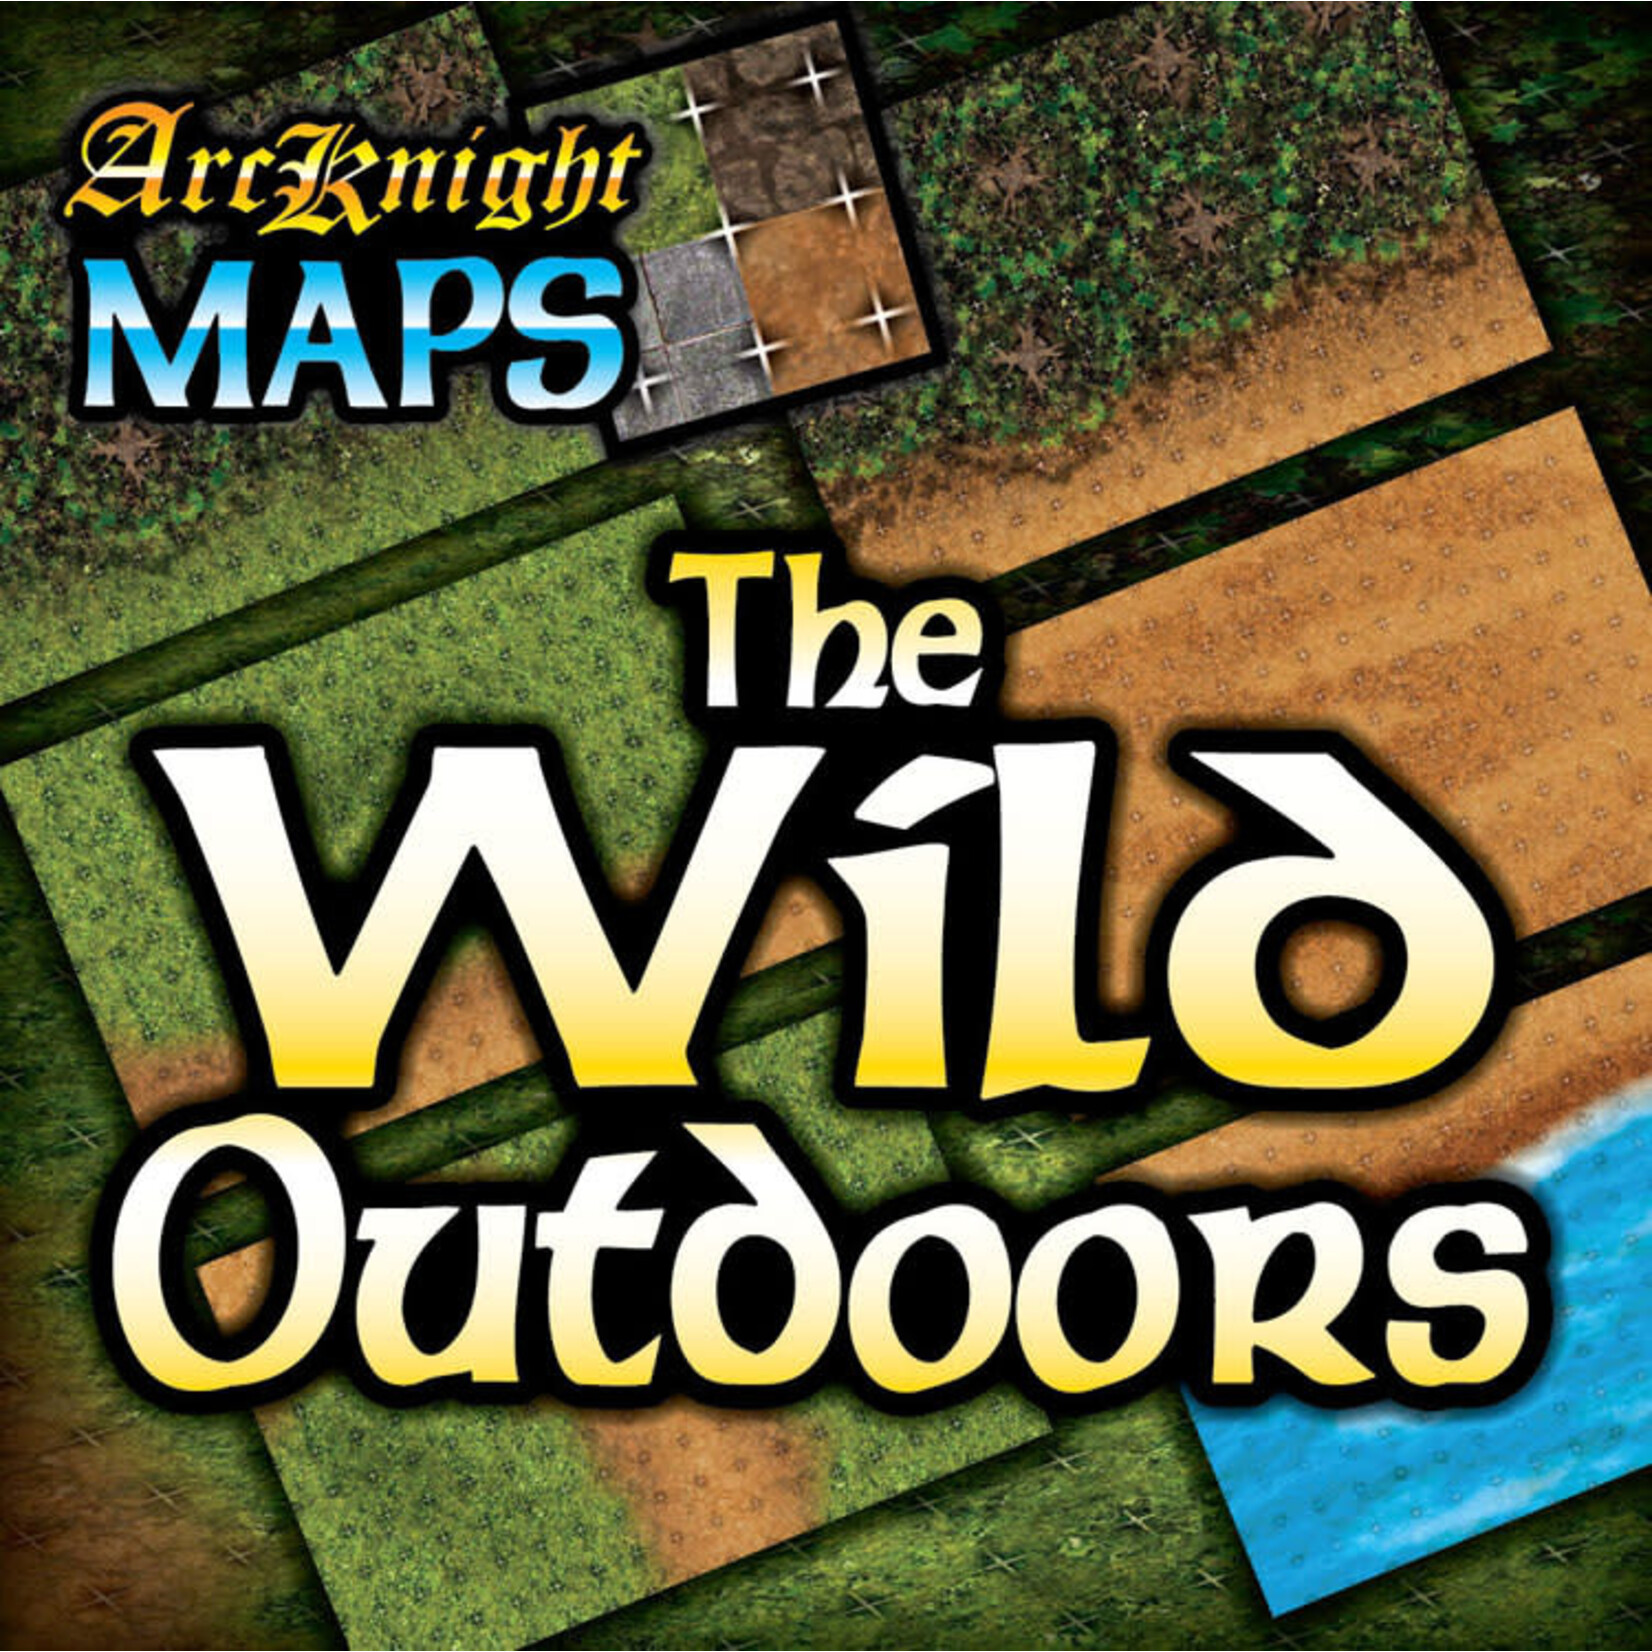 ArcKnight The Wild Outdoors 1" Square Grid Laminated Map Pack